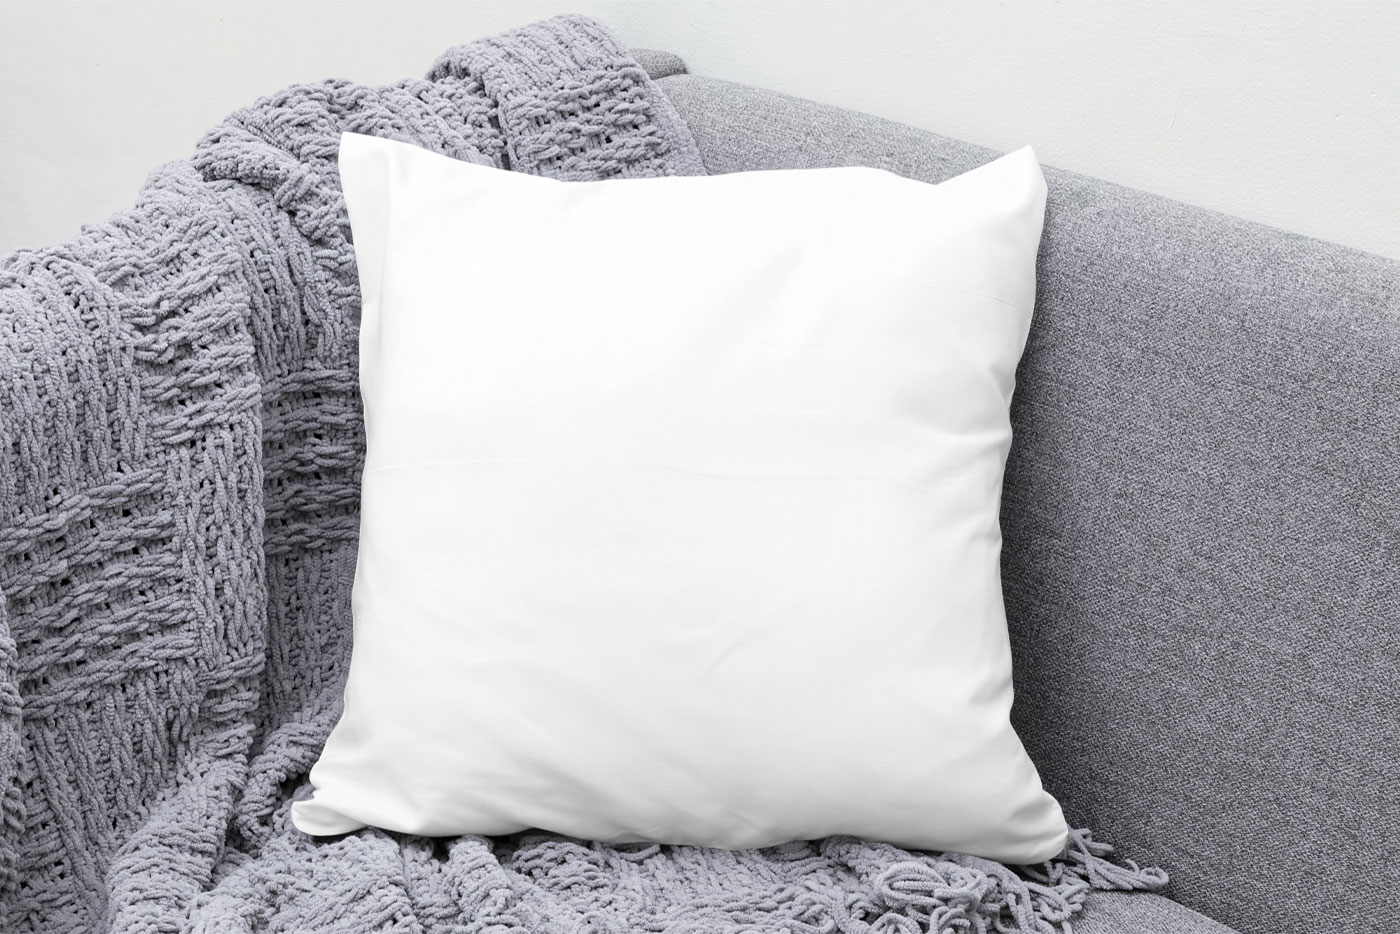 Forepart Sight of Pillow Mockup on Sofa FREE PSD